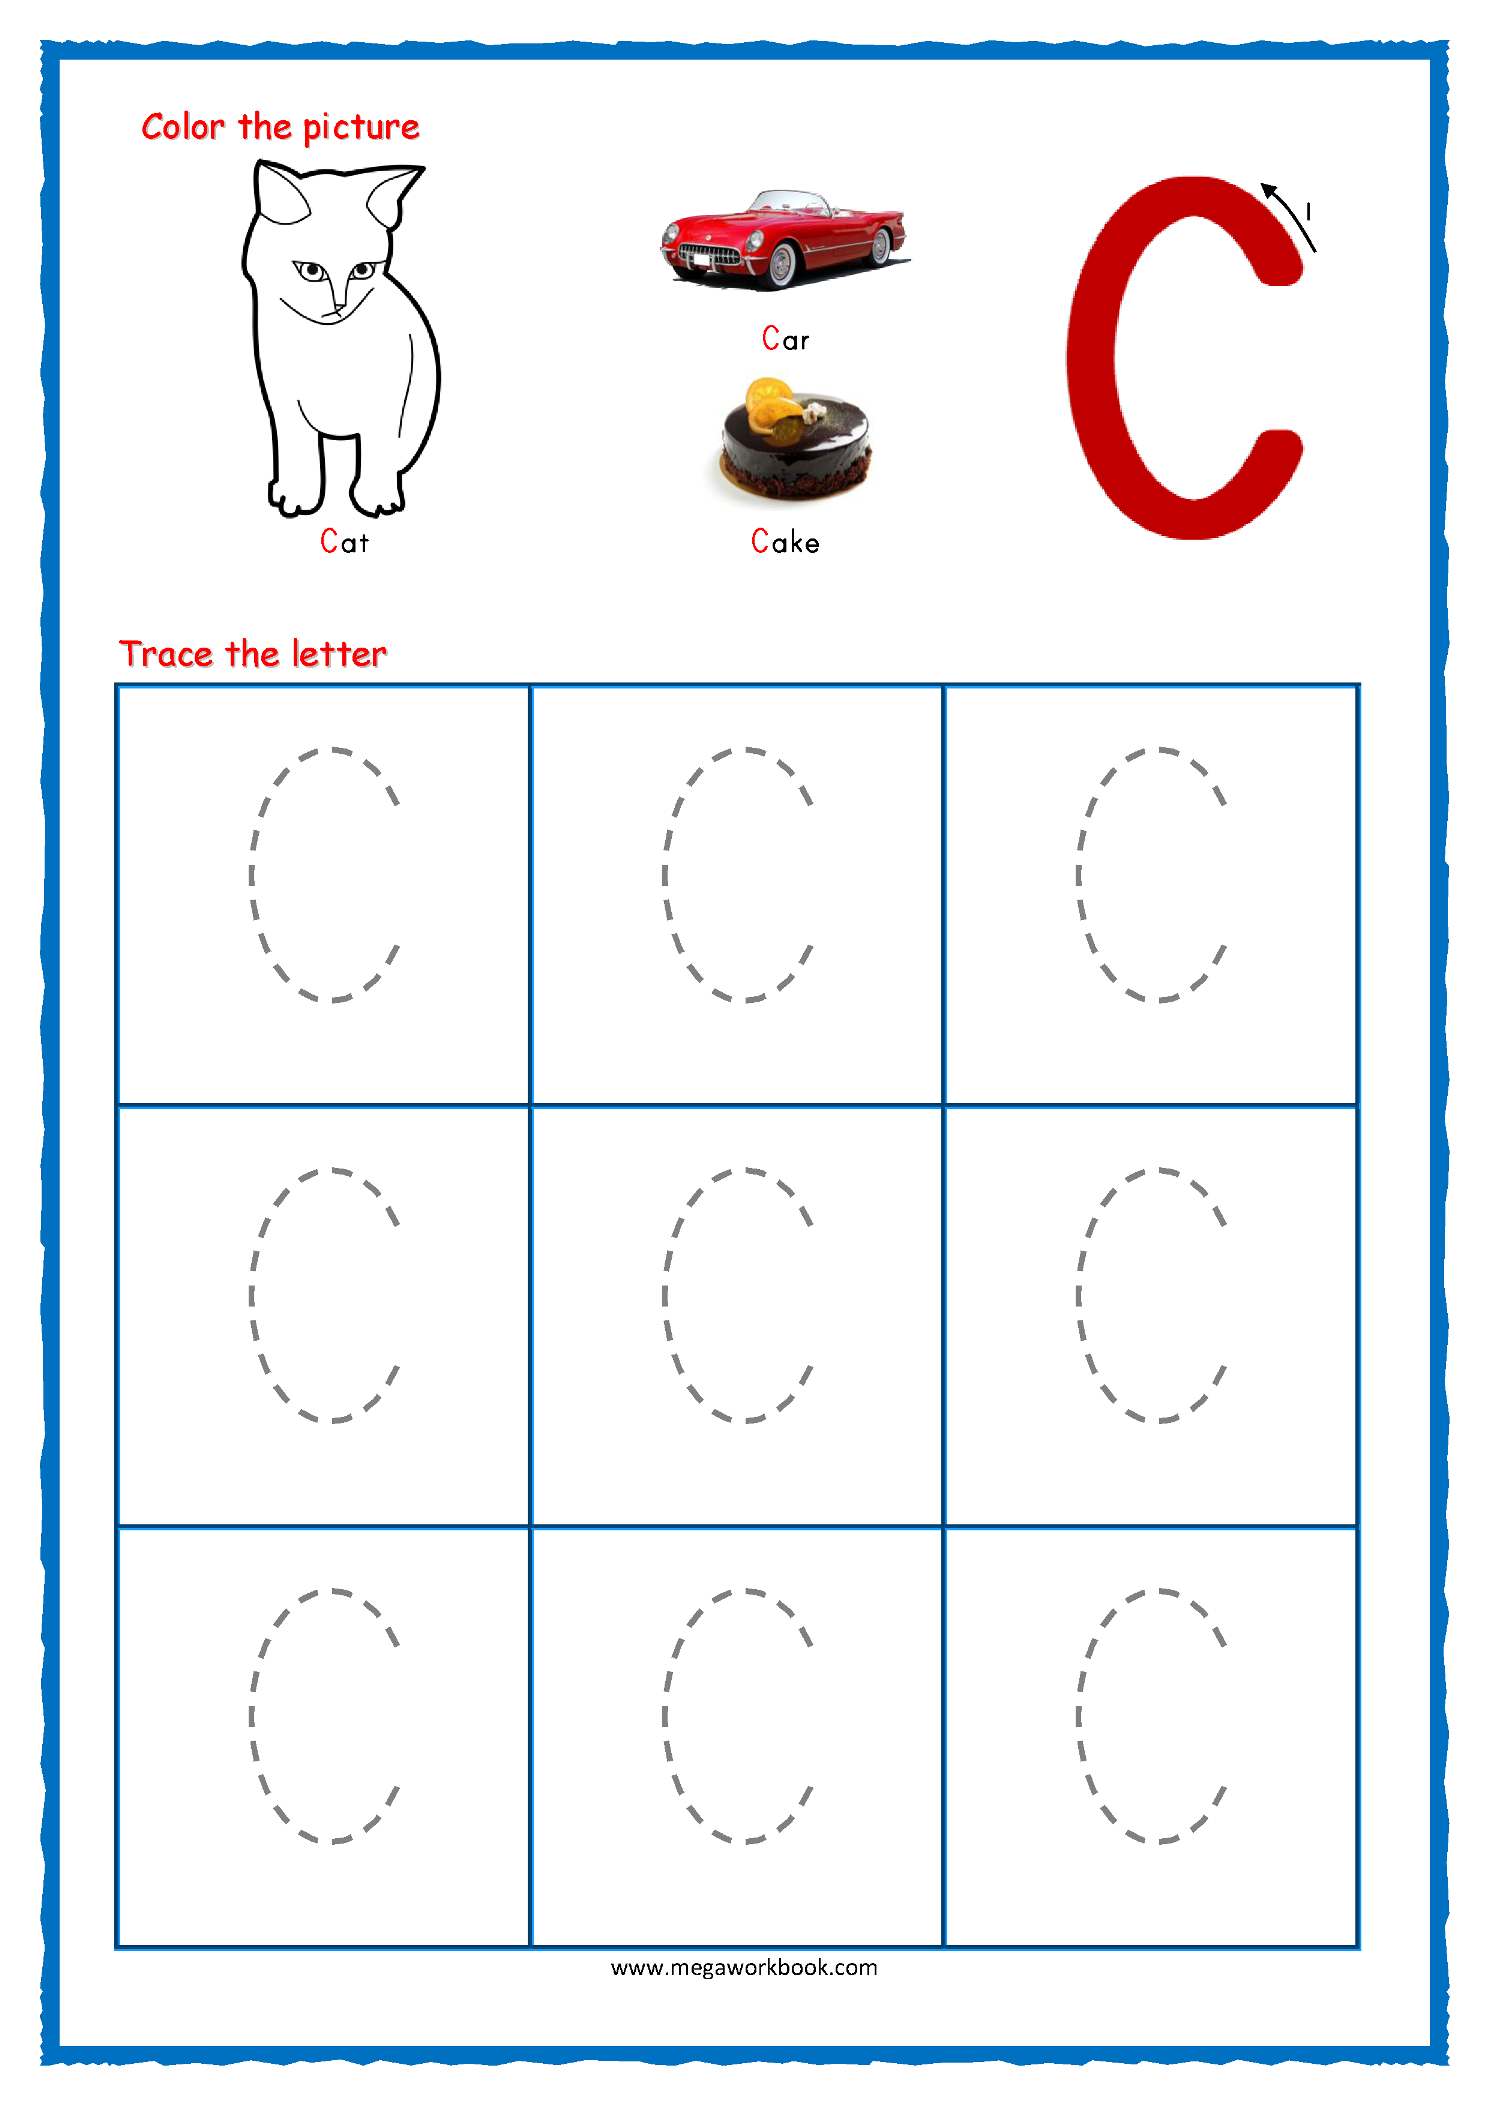 Tracing Letters - Alphabet Tracing - Capital Letters intended for Pre-K Worksheets Alphabet Tracing